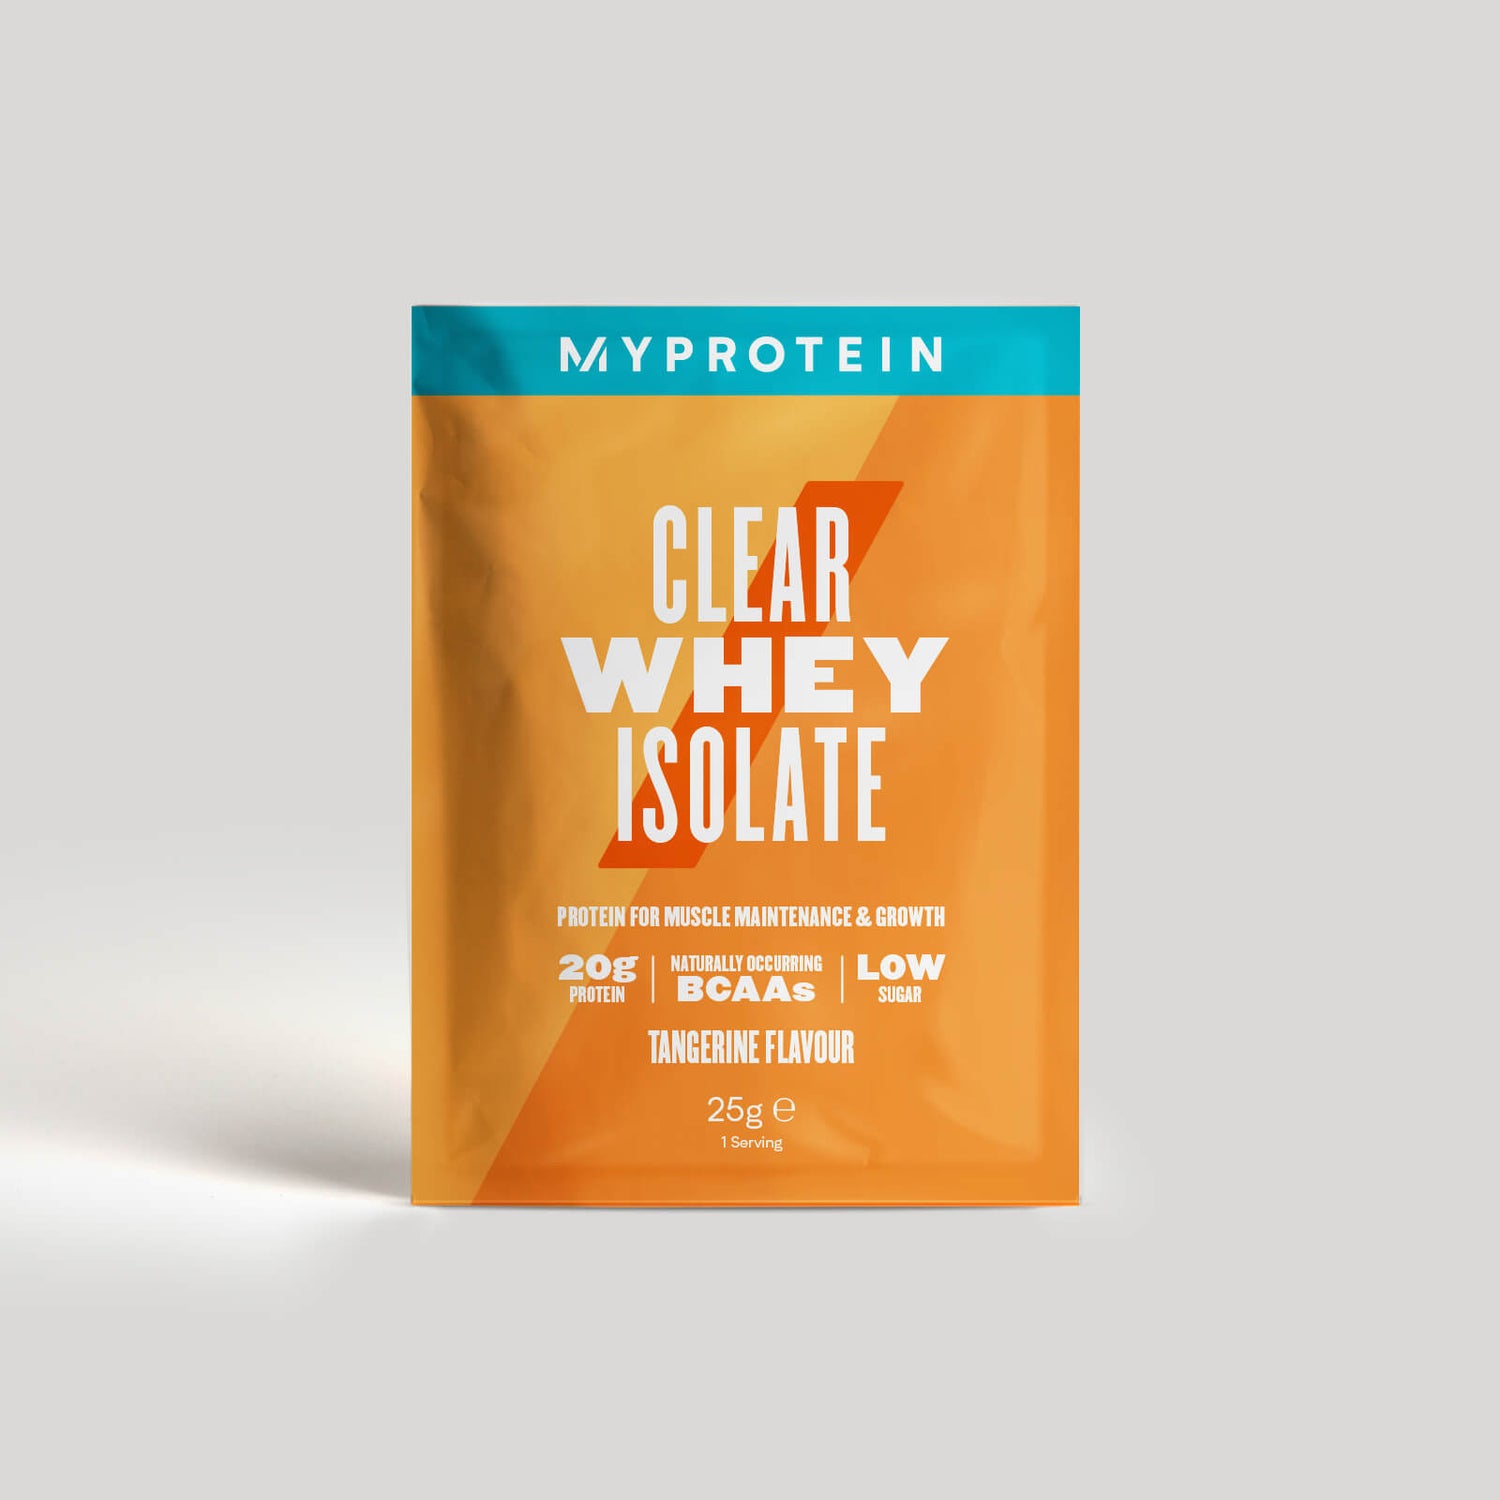 Myprotein Clear Whey Isolate (Sample) - 1servings - Tangerine